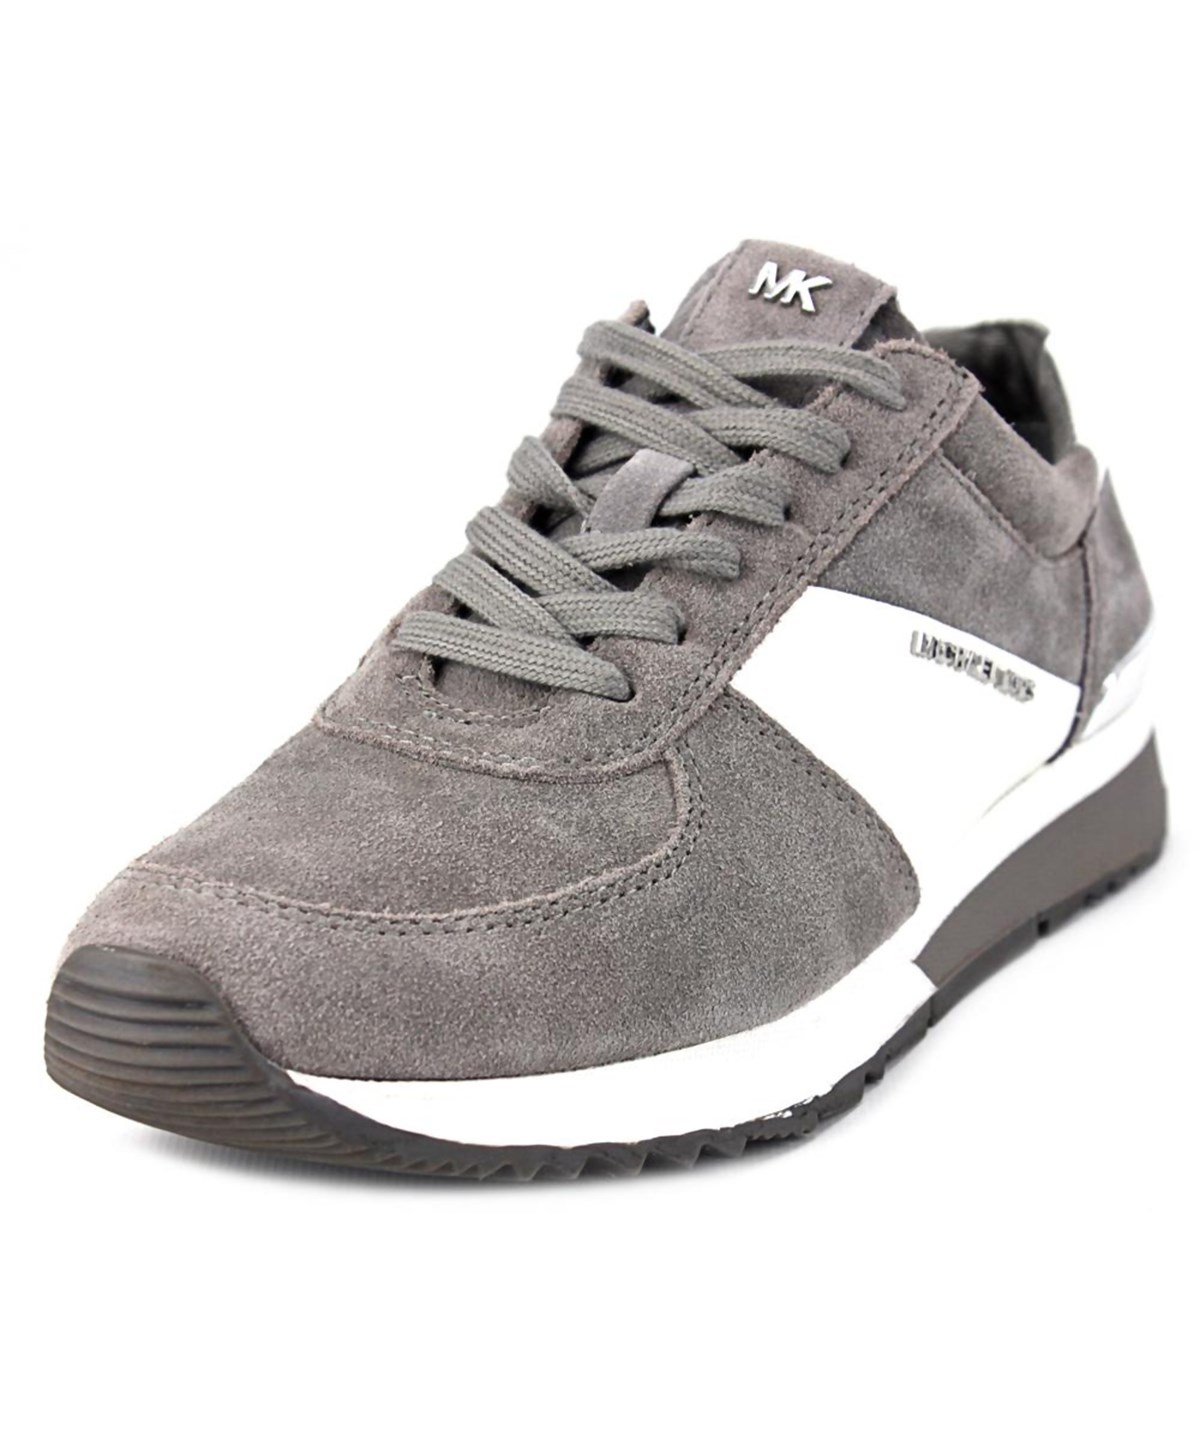 Michael Michael Kors Allie Trainer Women Leather Gray Fashion Sneakers ...